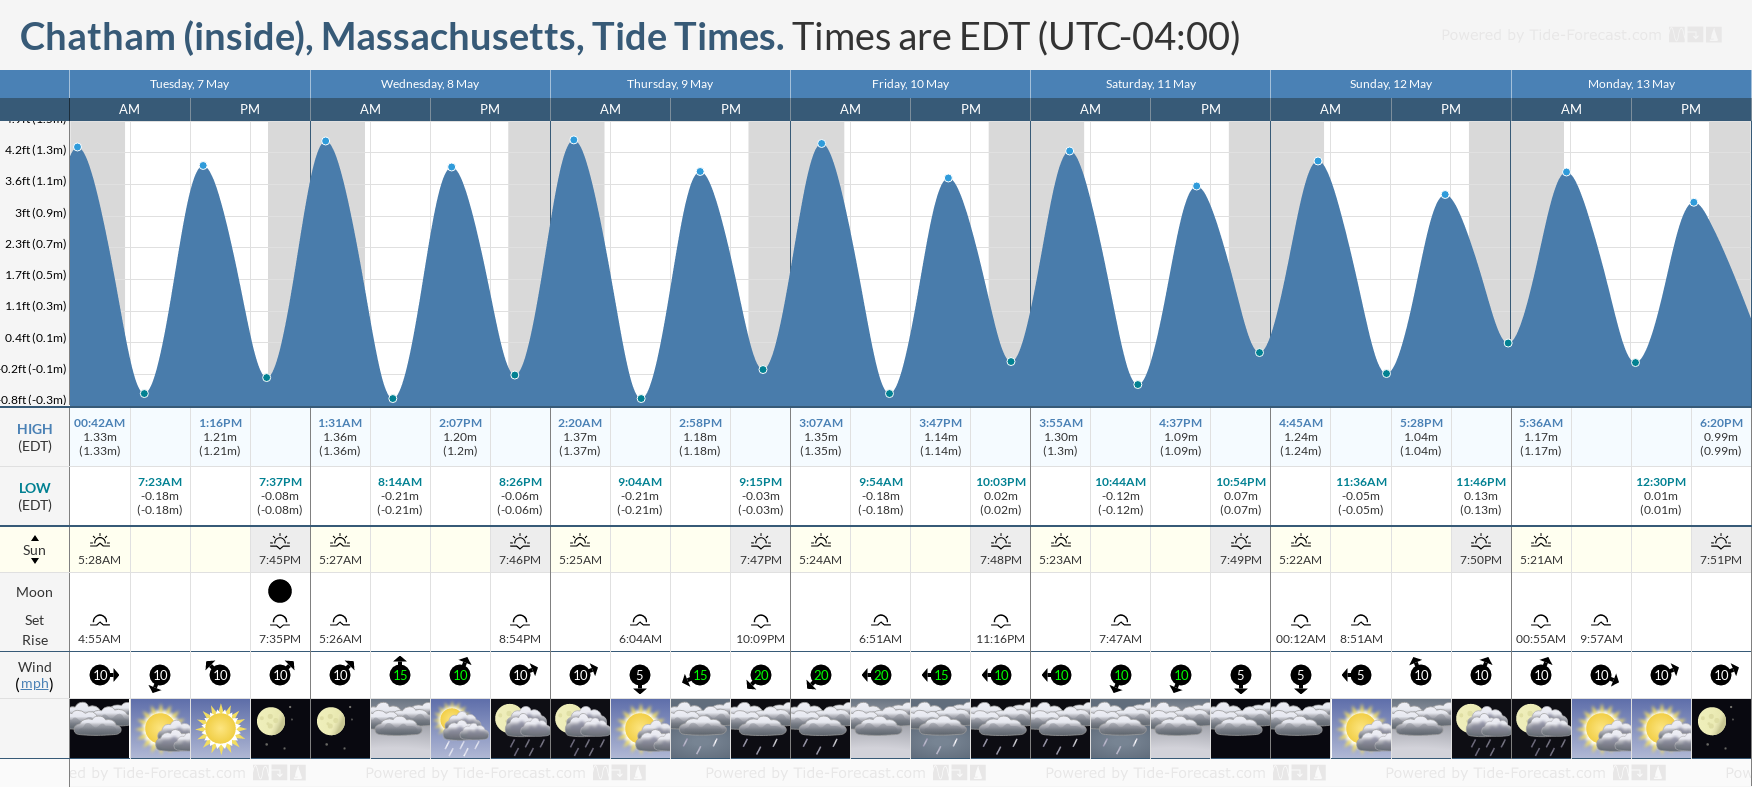 Chatham (inside), Massachusetts Tide Chart including high and low tide tide times for the next 7 days